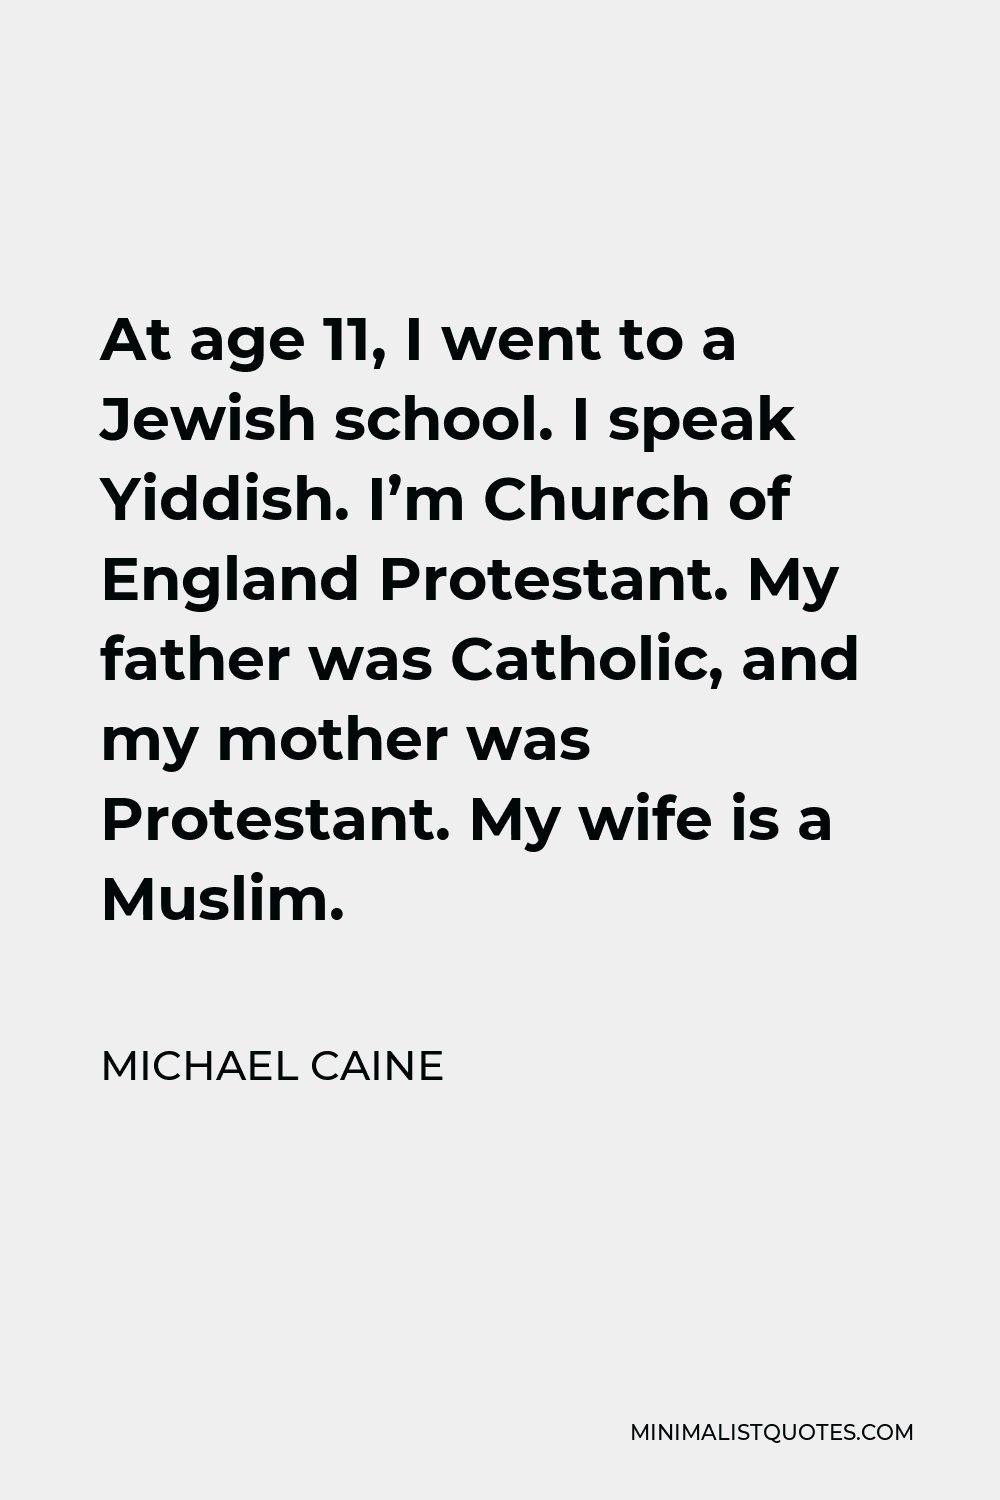 Michael Caine Quote - At age 11, I went to a Jewish school. I speak Yiddish. I’m Church of England Protestant. My father was Catholic, and my mother was Protestant. My wife is a Muslim.